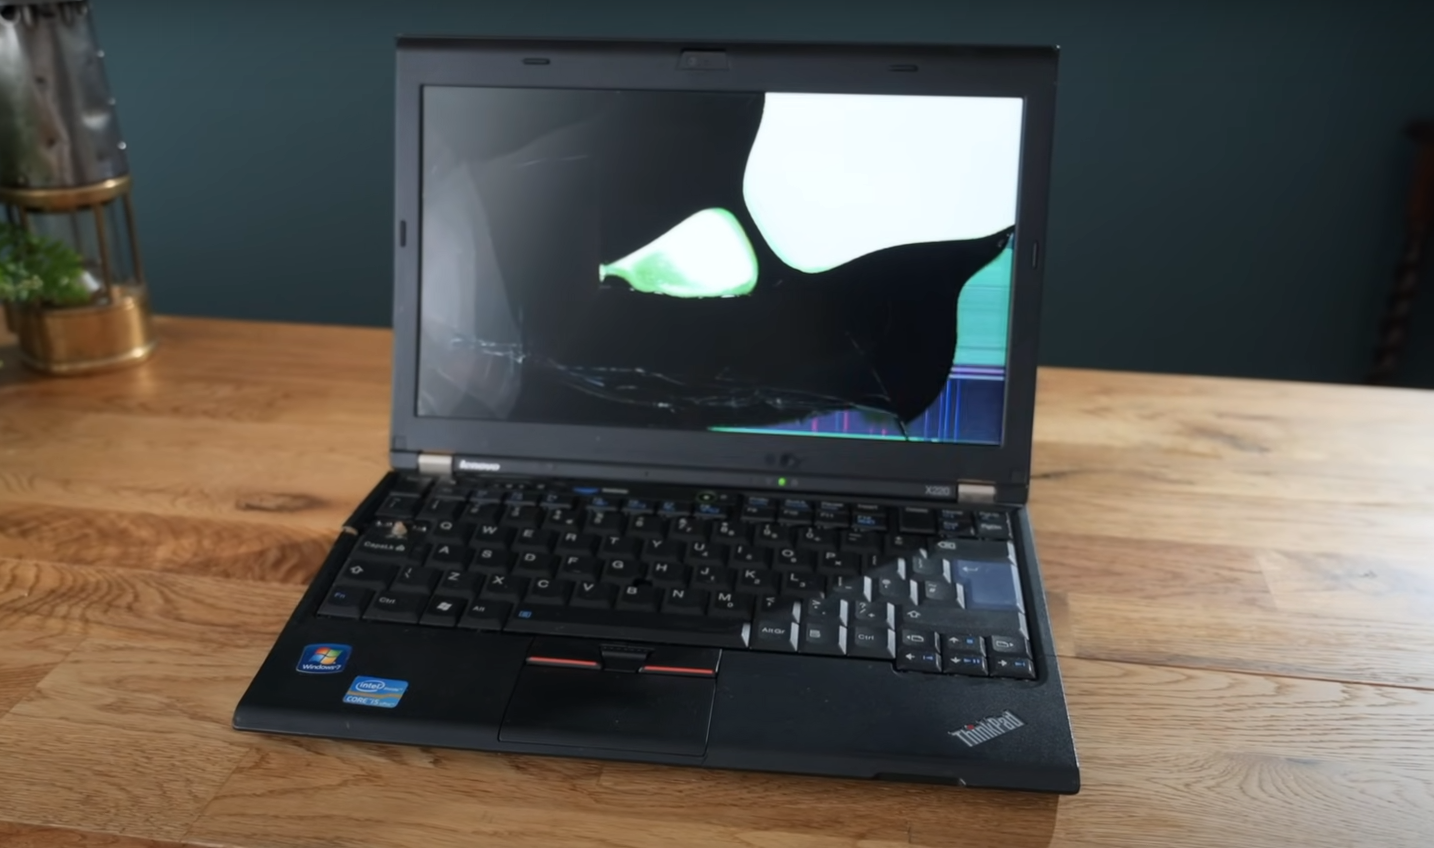 What Do You Do With An Old Laptop